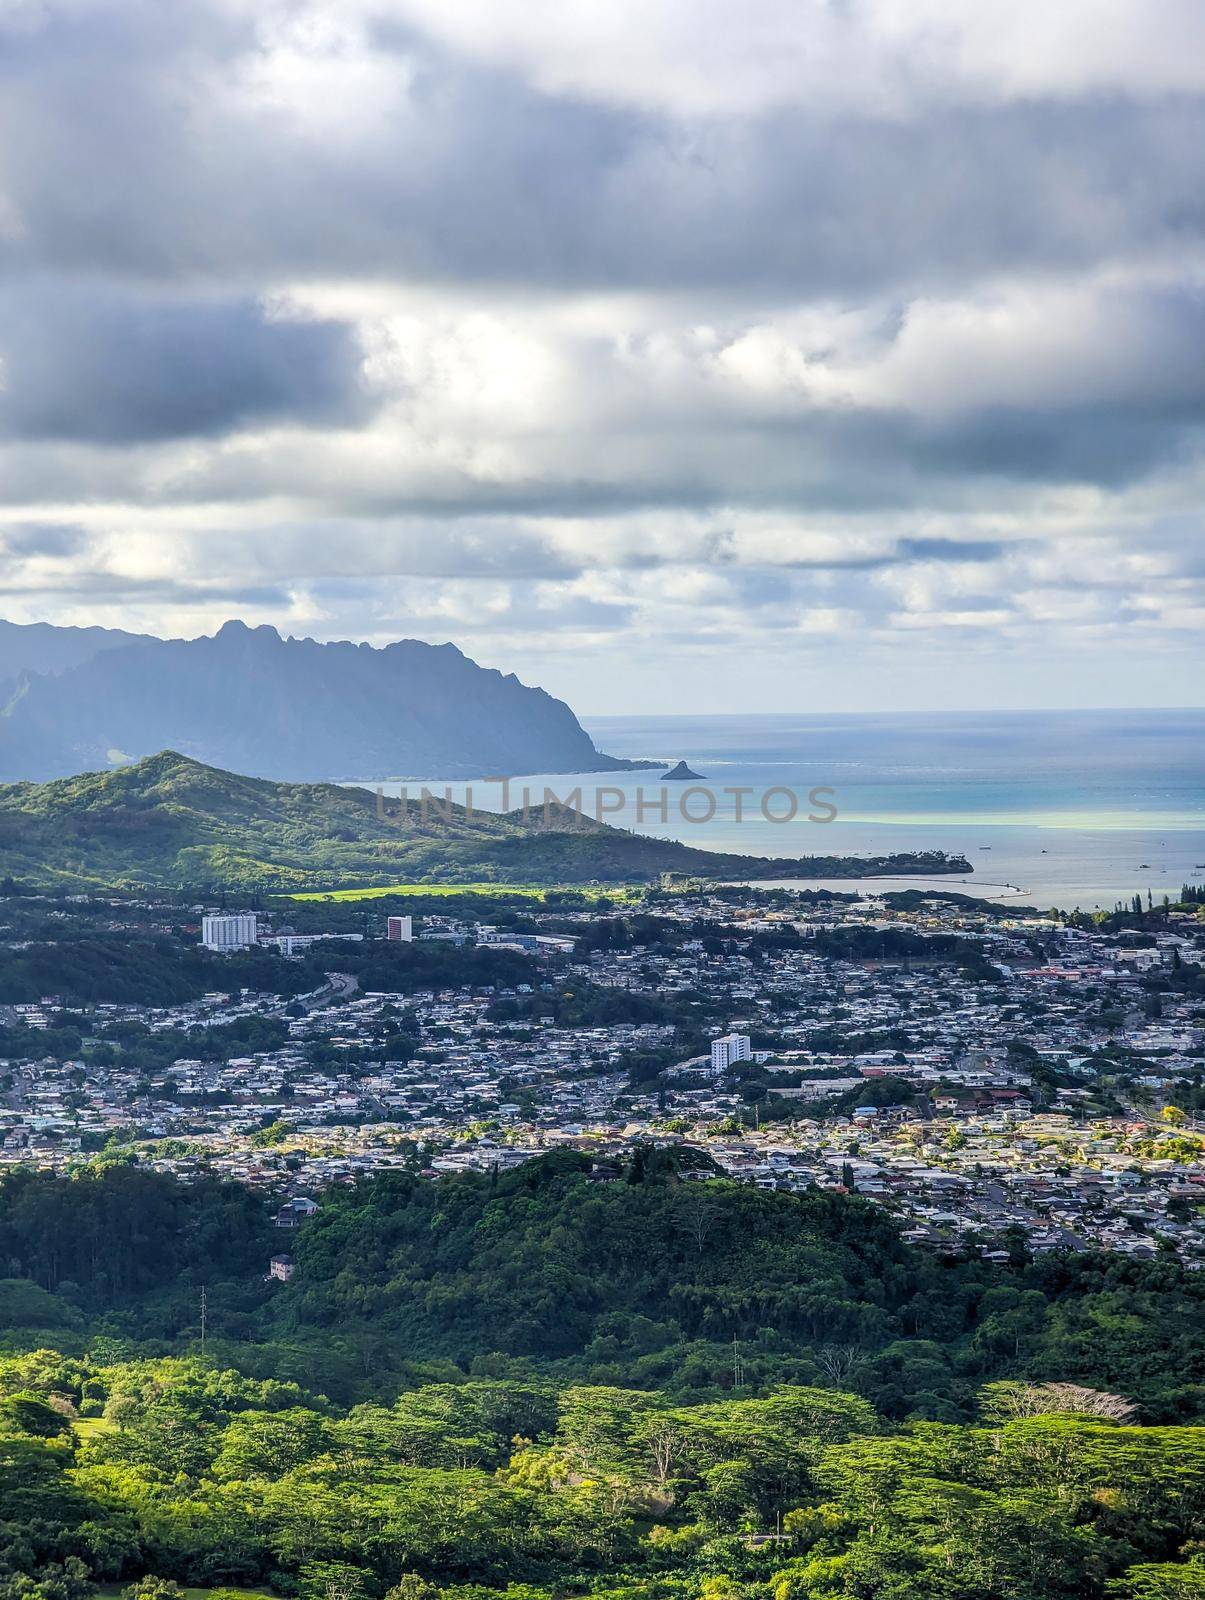 pali look out with beautiful views in oahu hawaii by digidreamgrafix